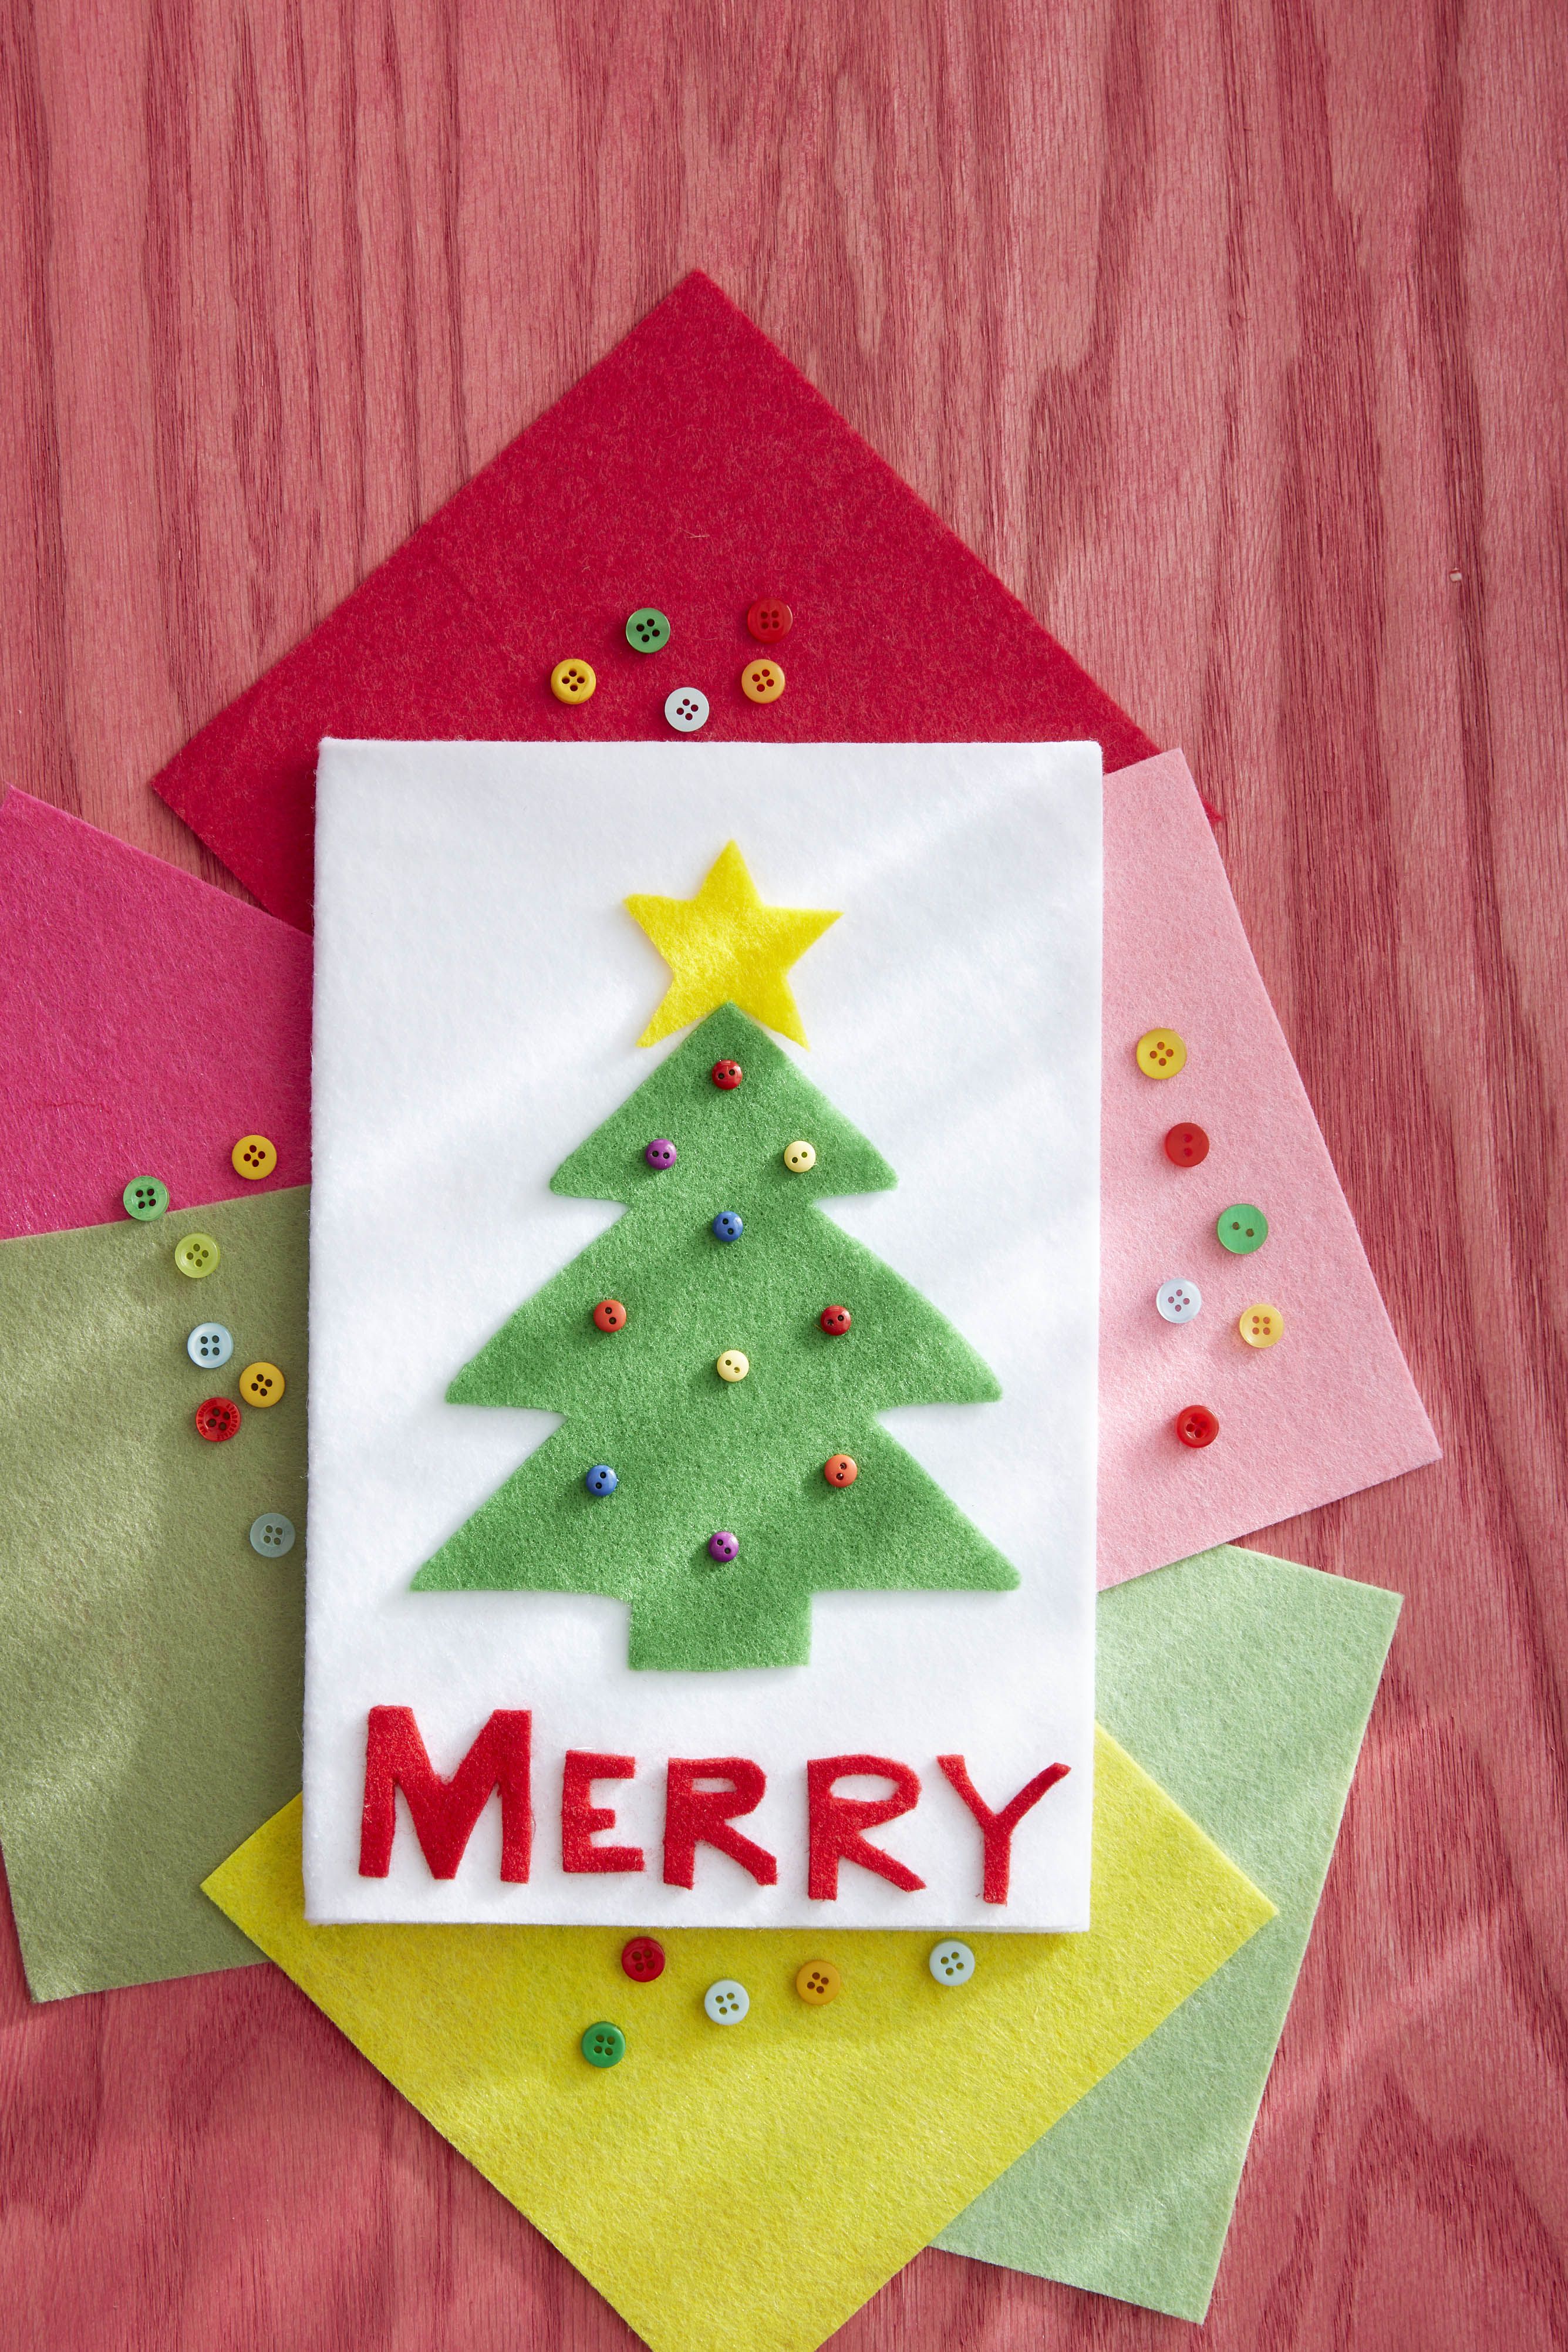 Easy Diy Christmas Cards Ideas The Post s Popularity Told Us That 